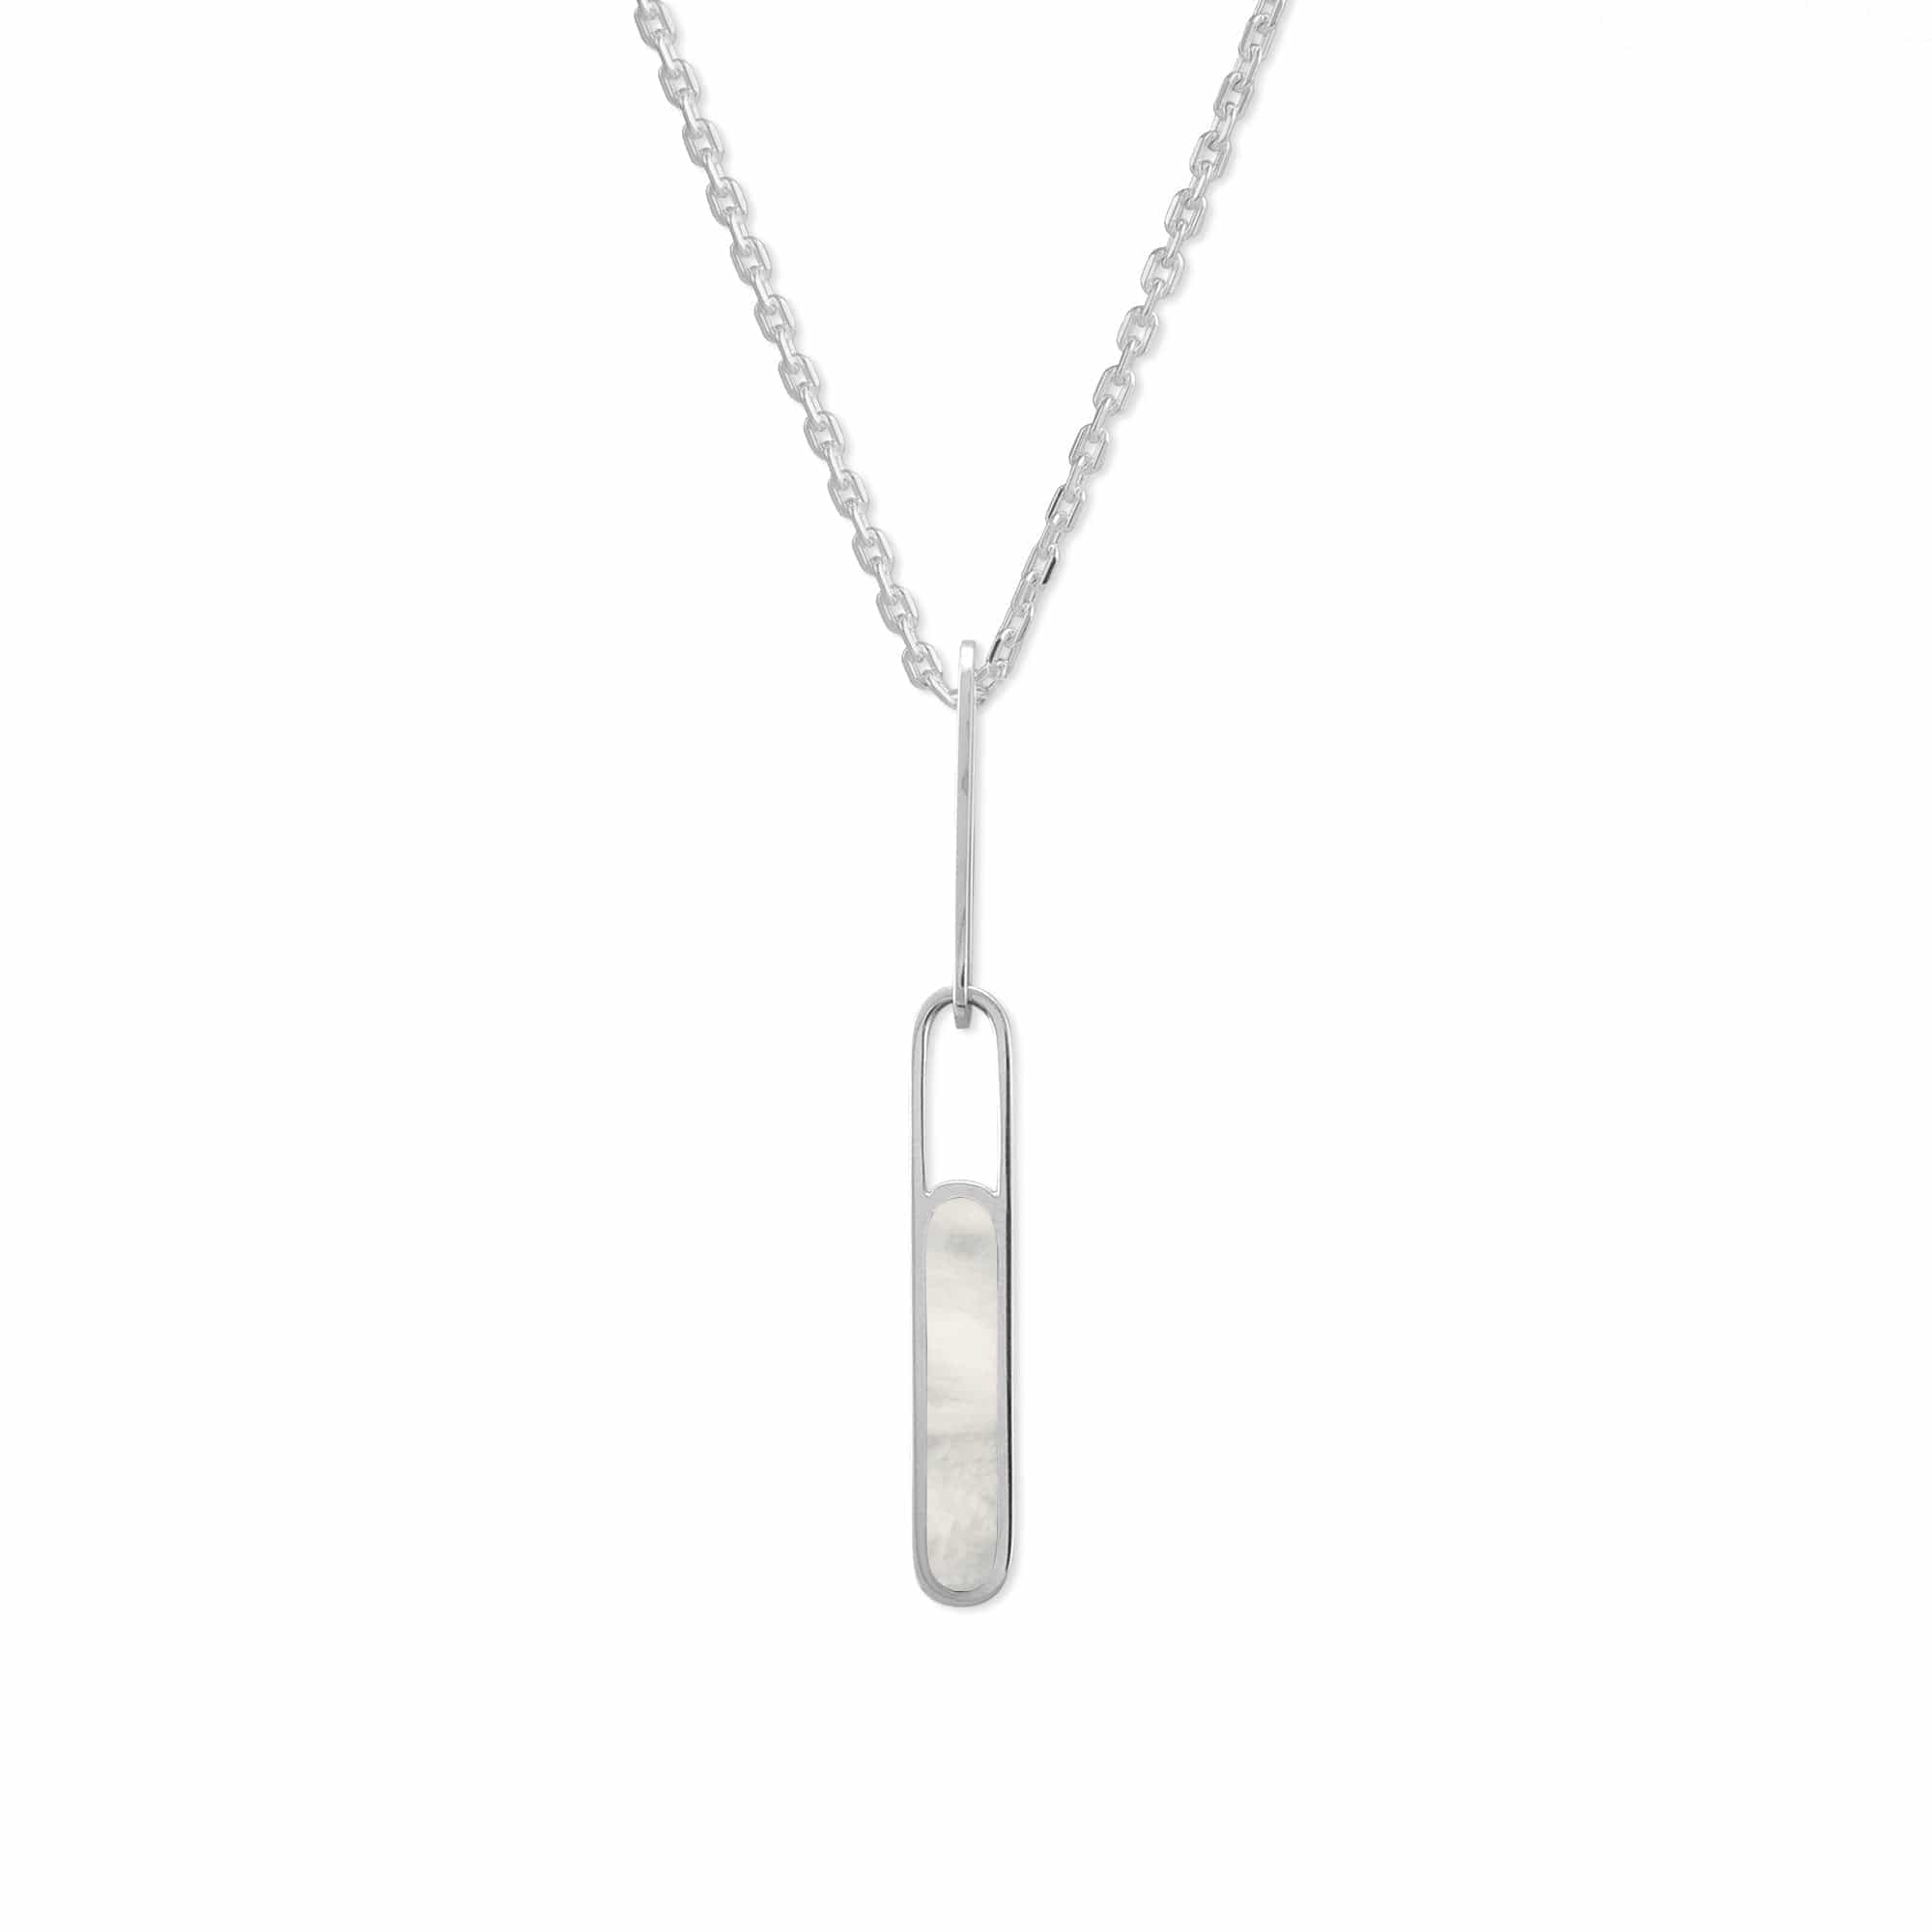 Boma Jewelry Necklaces Mother of Pearl Alina Bezel Pendant Necklace with Stone